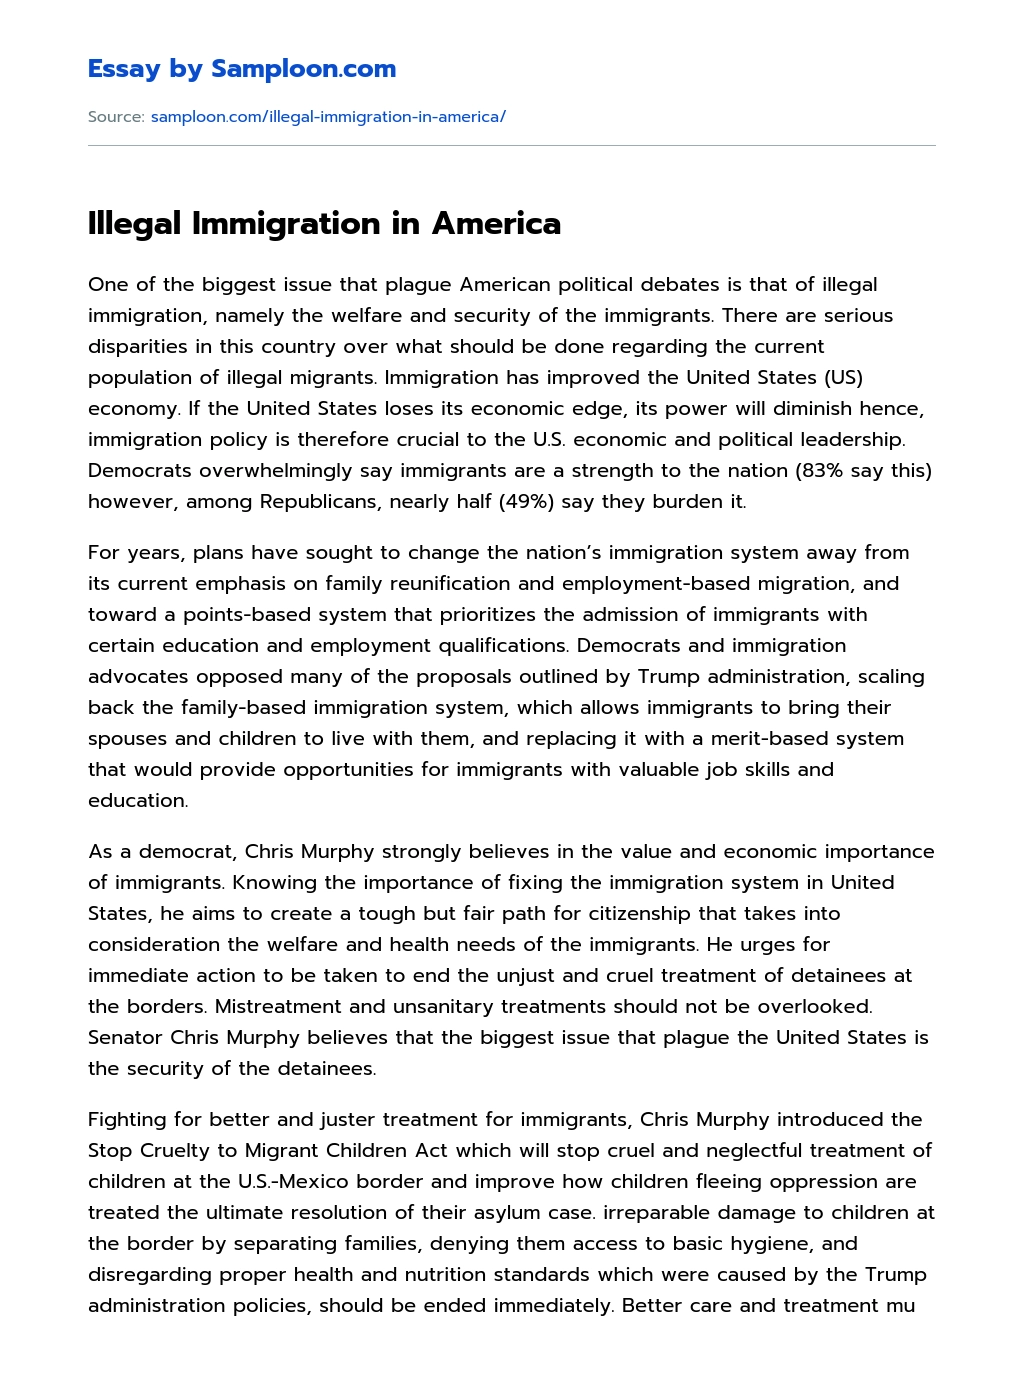 Illegal Immigration as a Huge Problem in the US essay